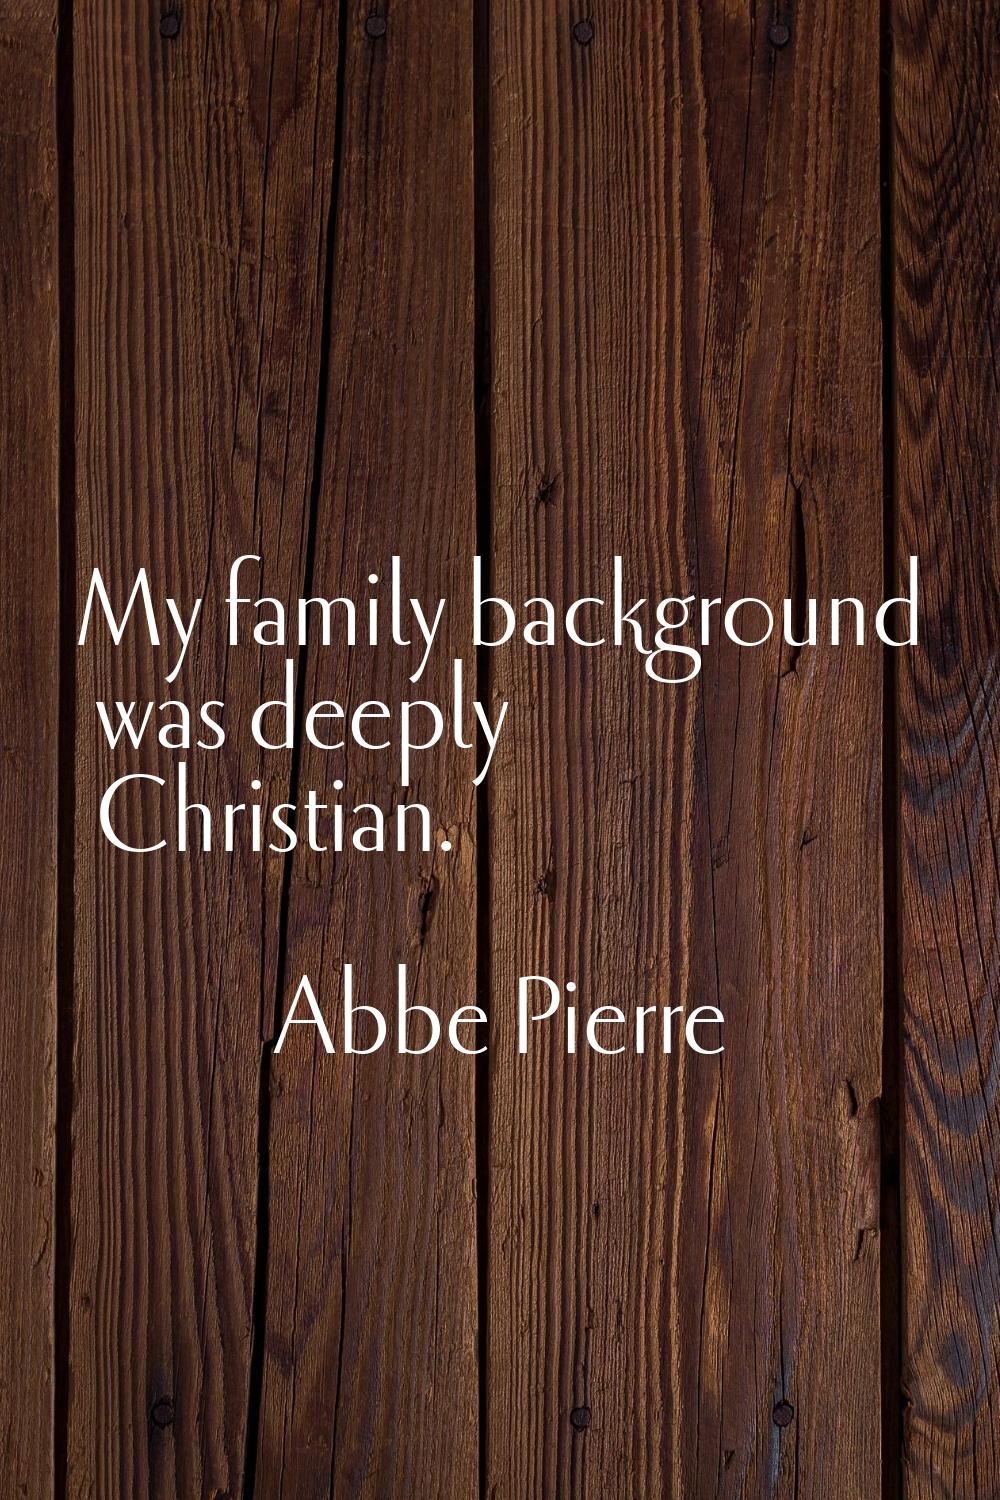 My family background was deeply Christian.